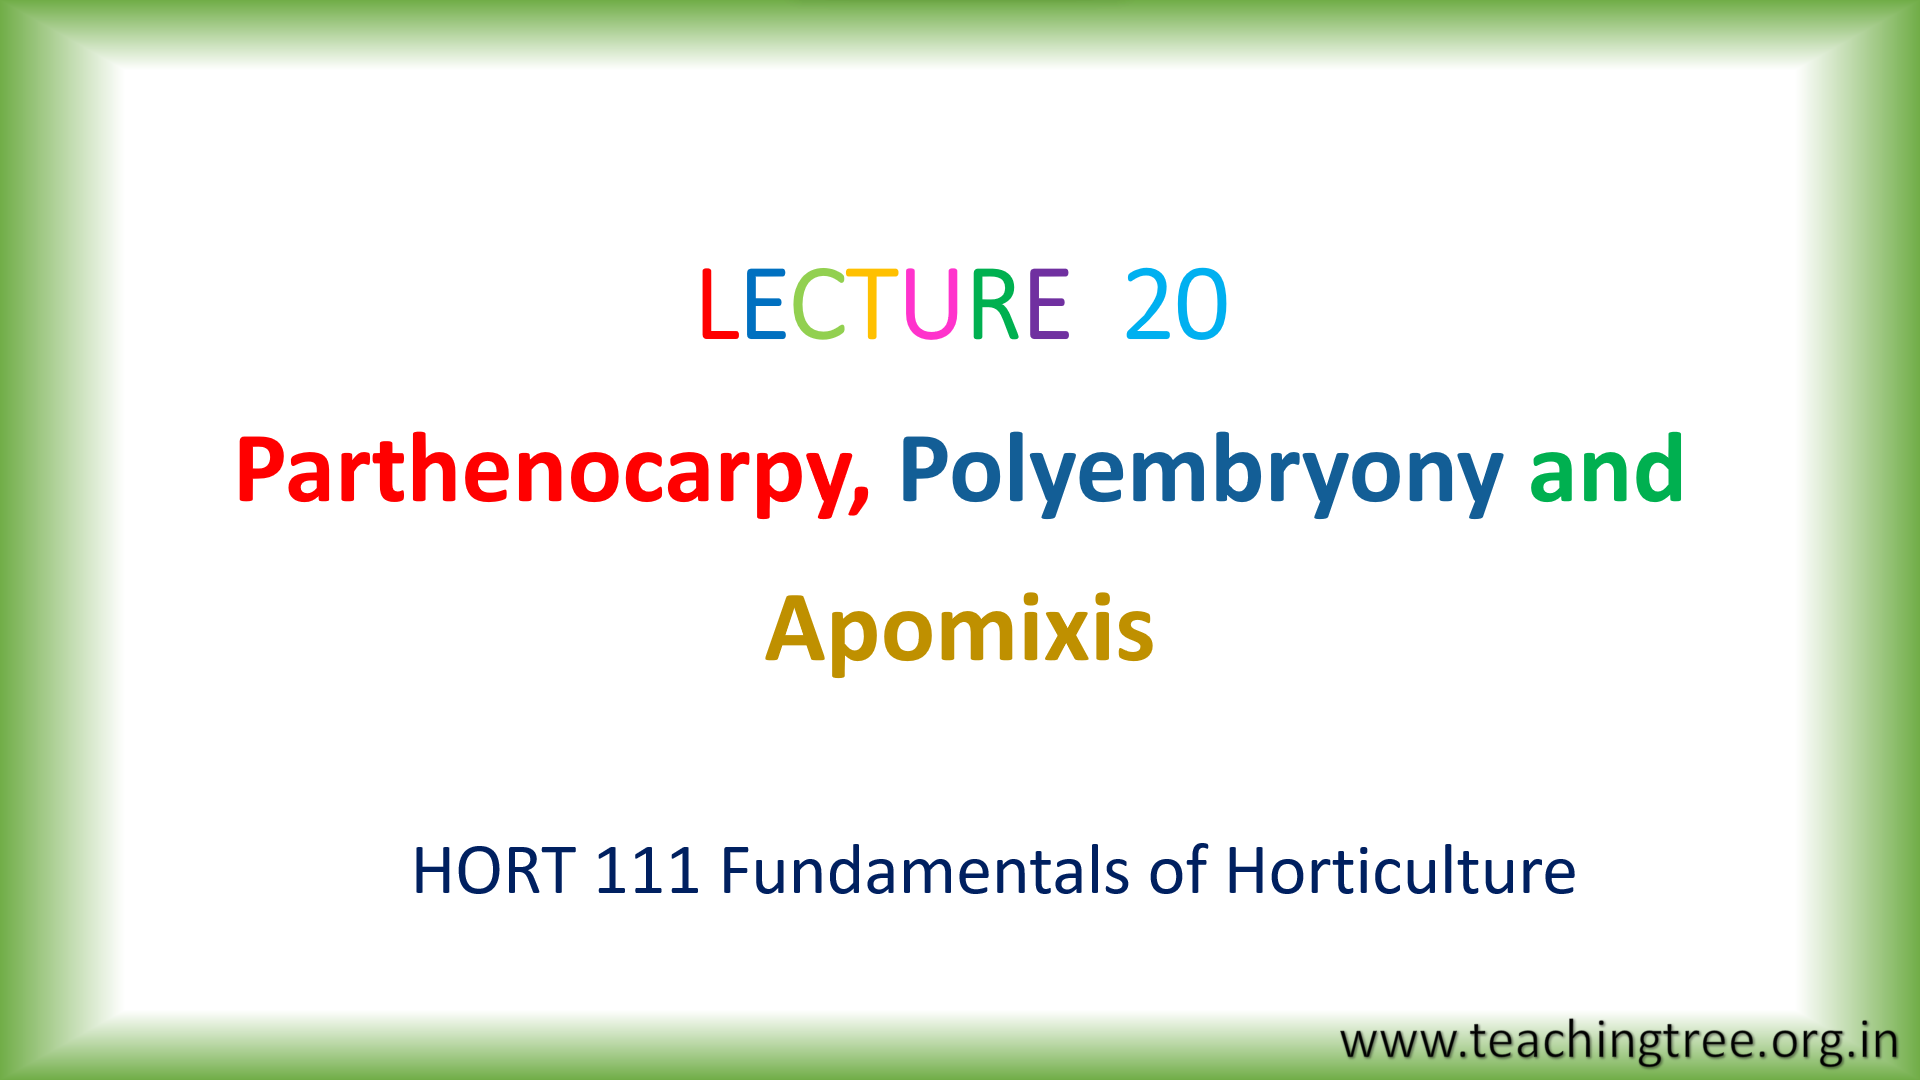 Parthenocarpy, Polyembryony and Apomixis PPT